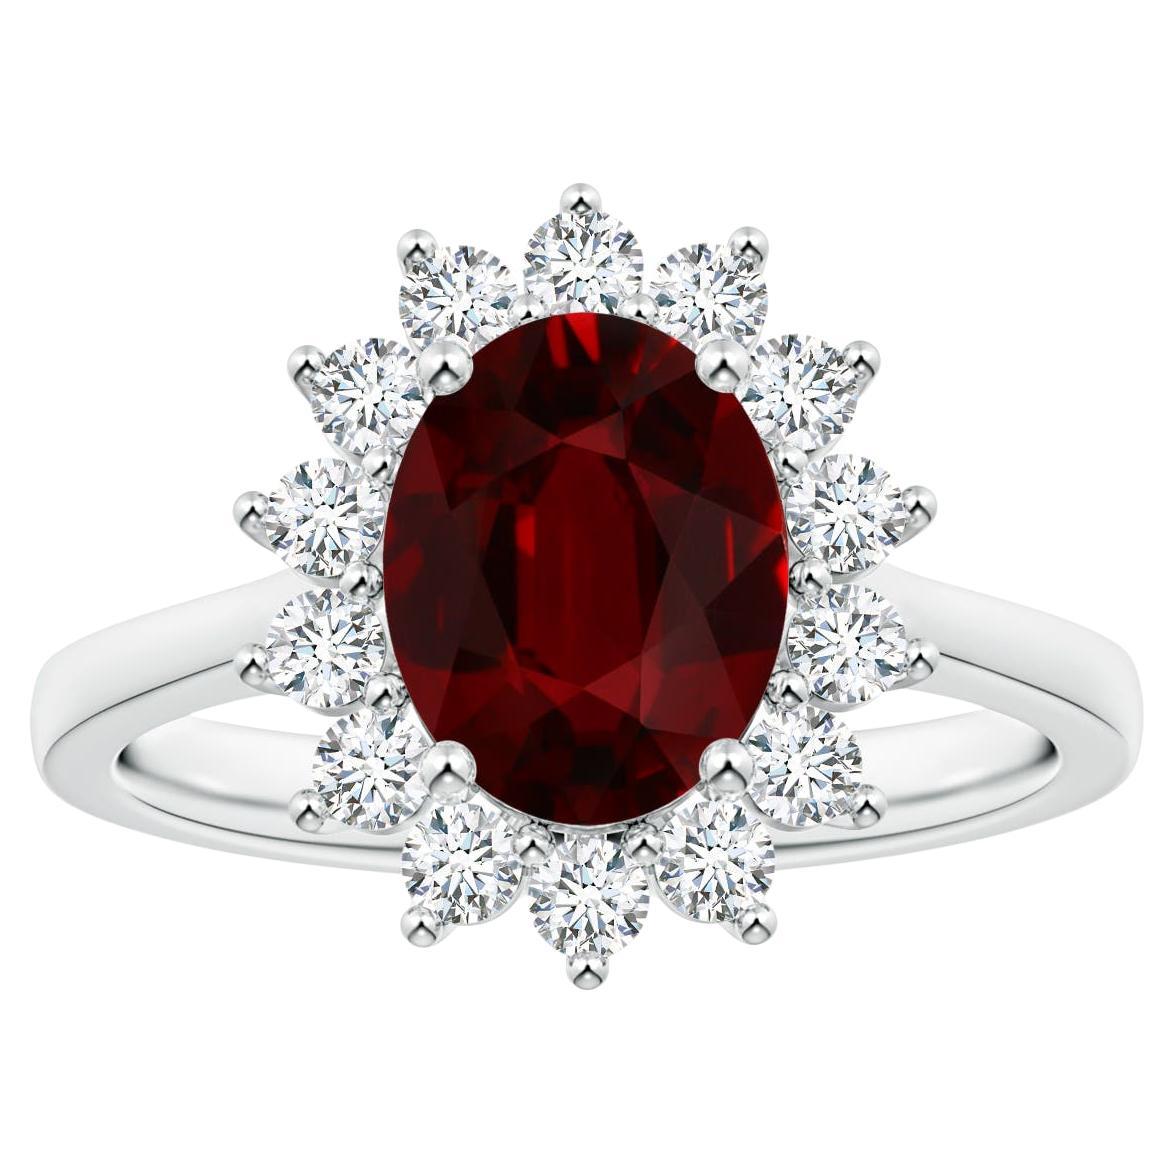 ANGARA Princess Diana Inspired GIA Certified Ruby Halo Ring in White Gold